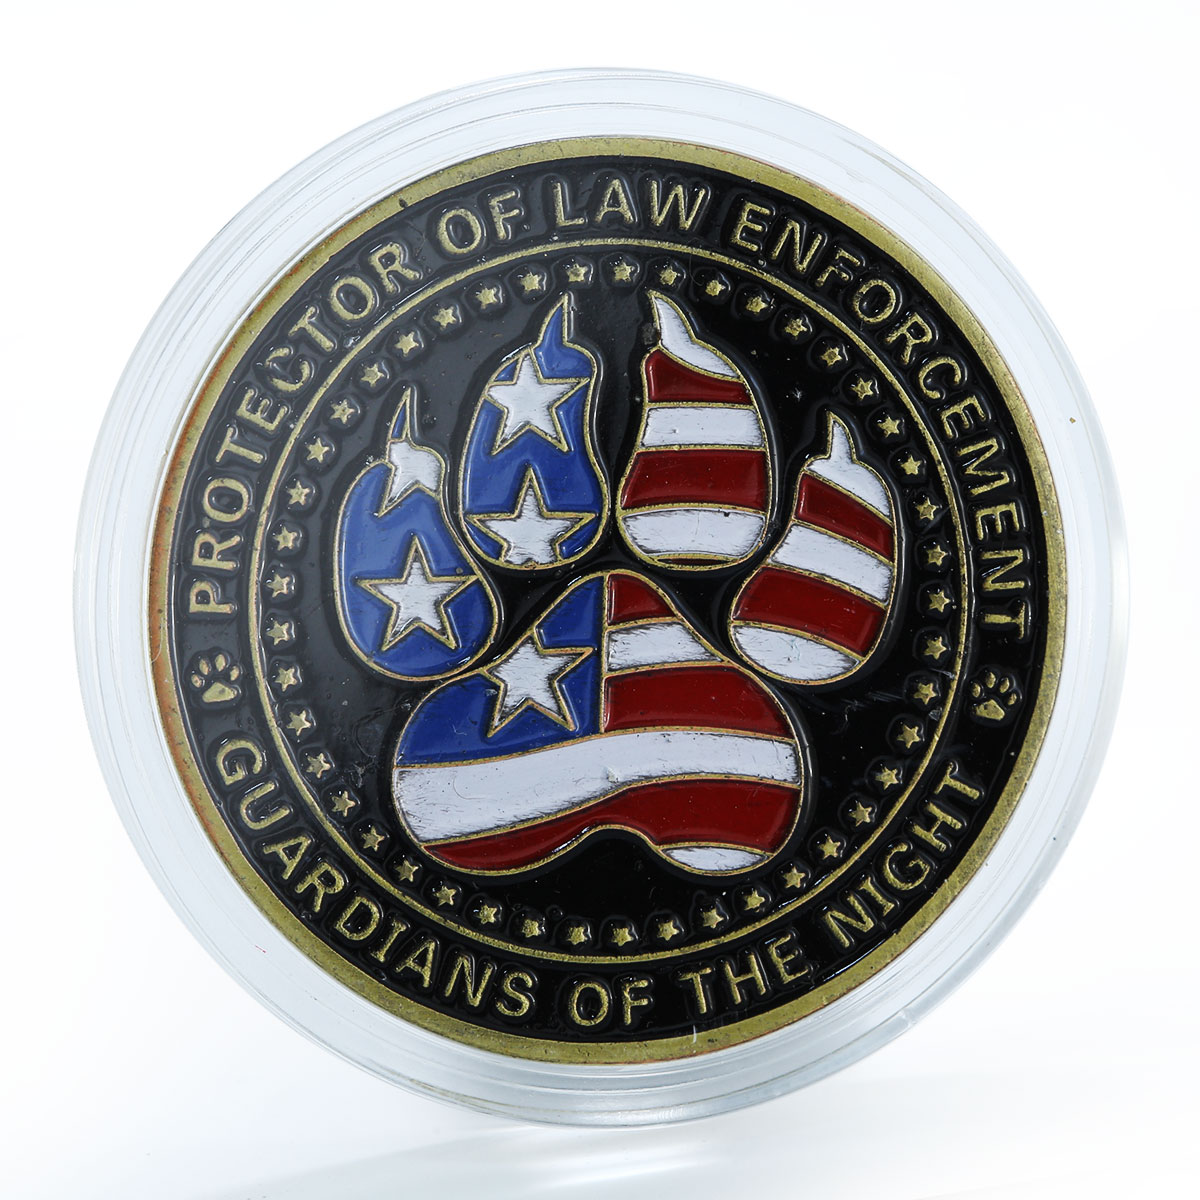 USA Protector of Law Enforcement, Guardians of the Night, K9 Canine Paw token